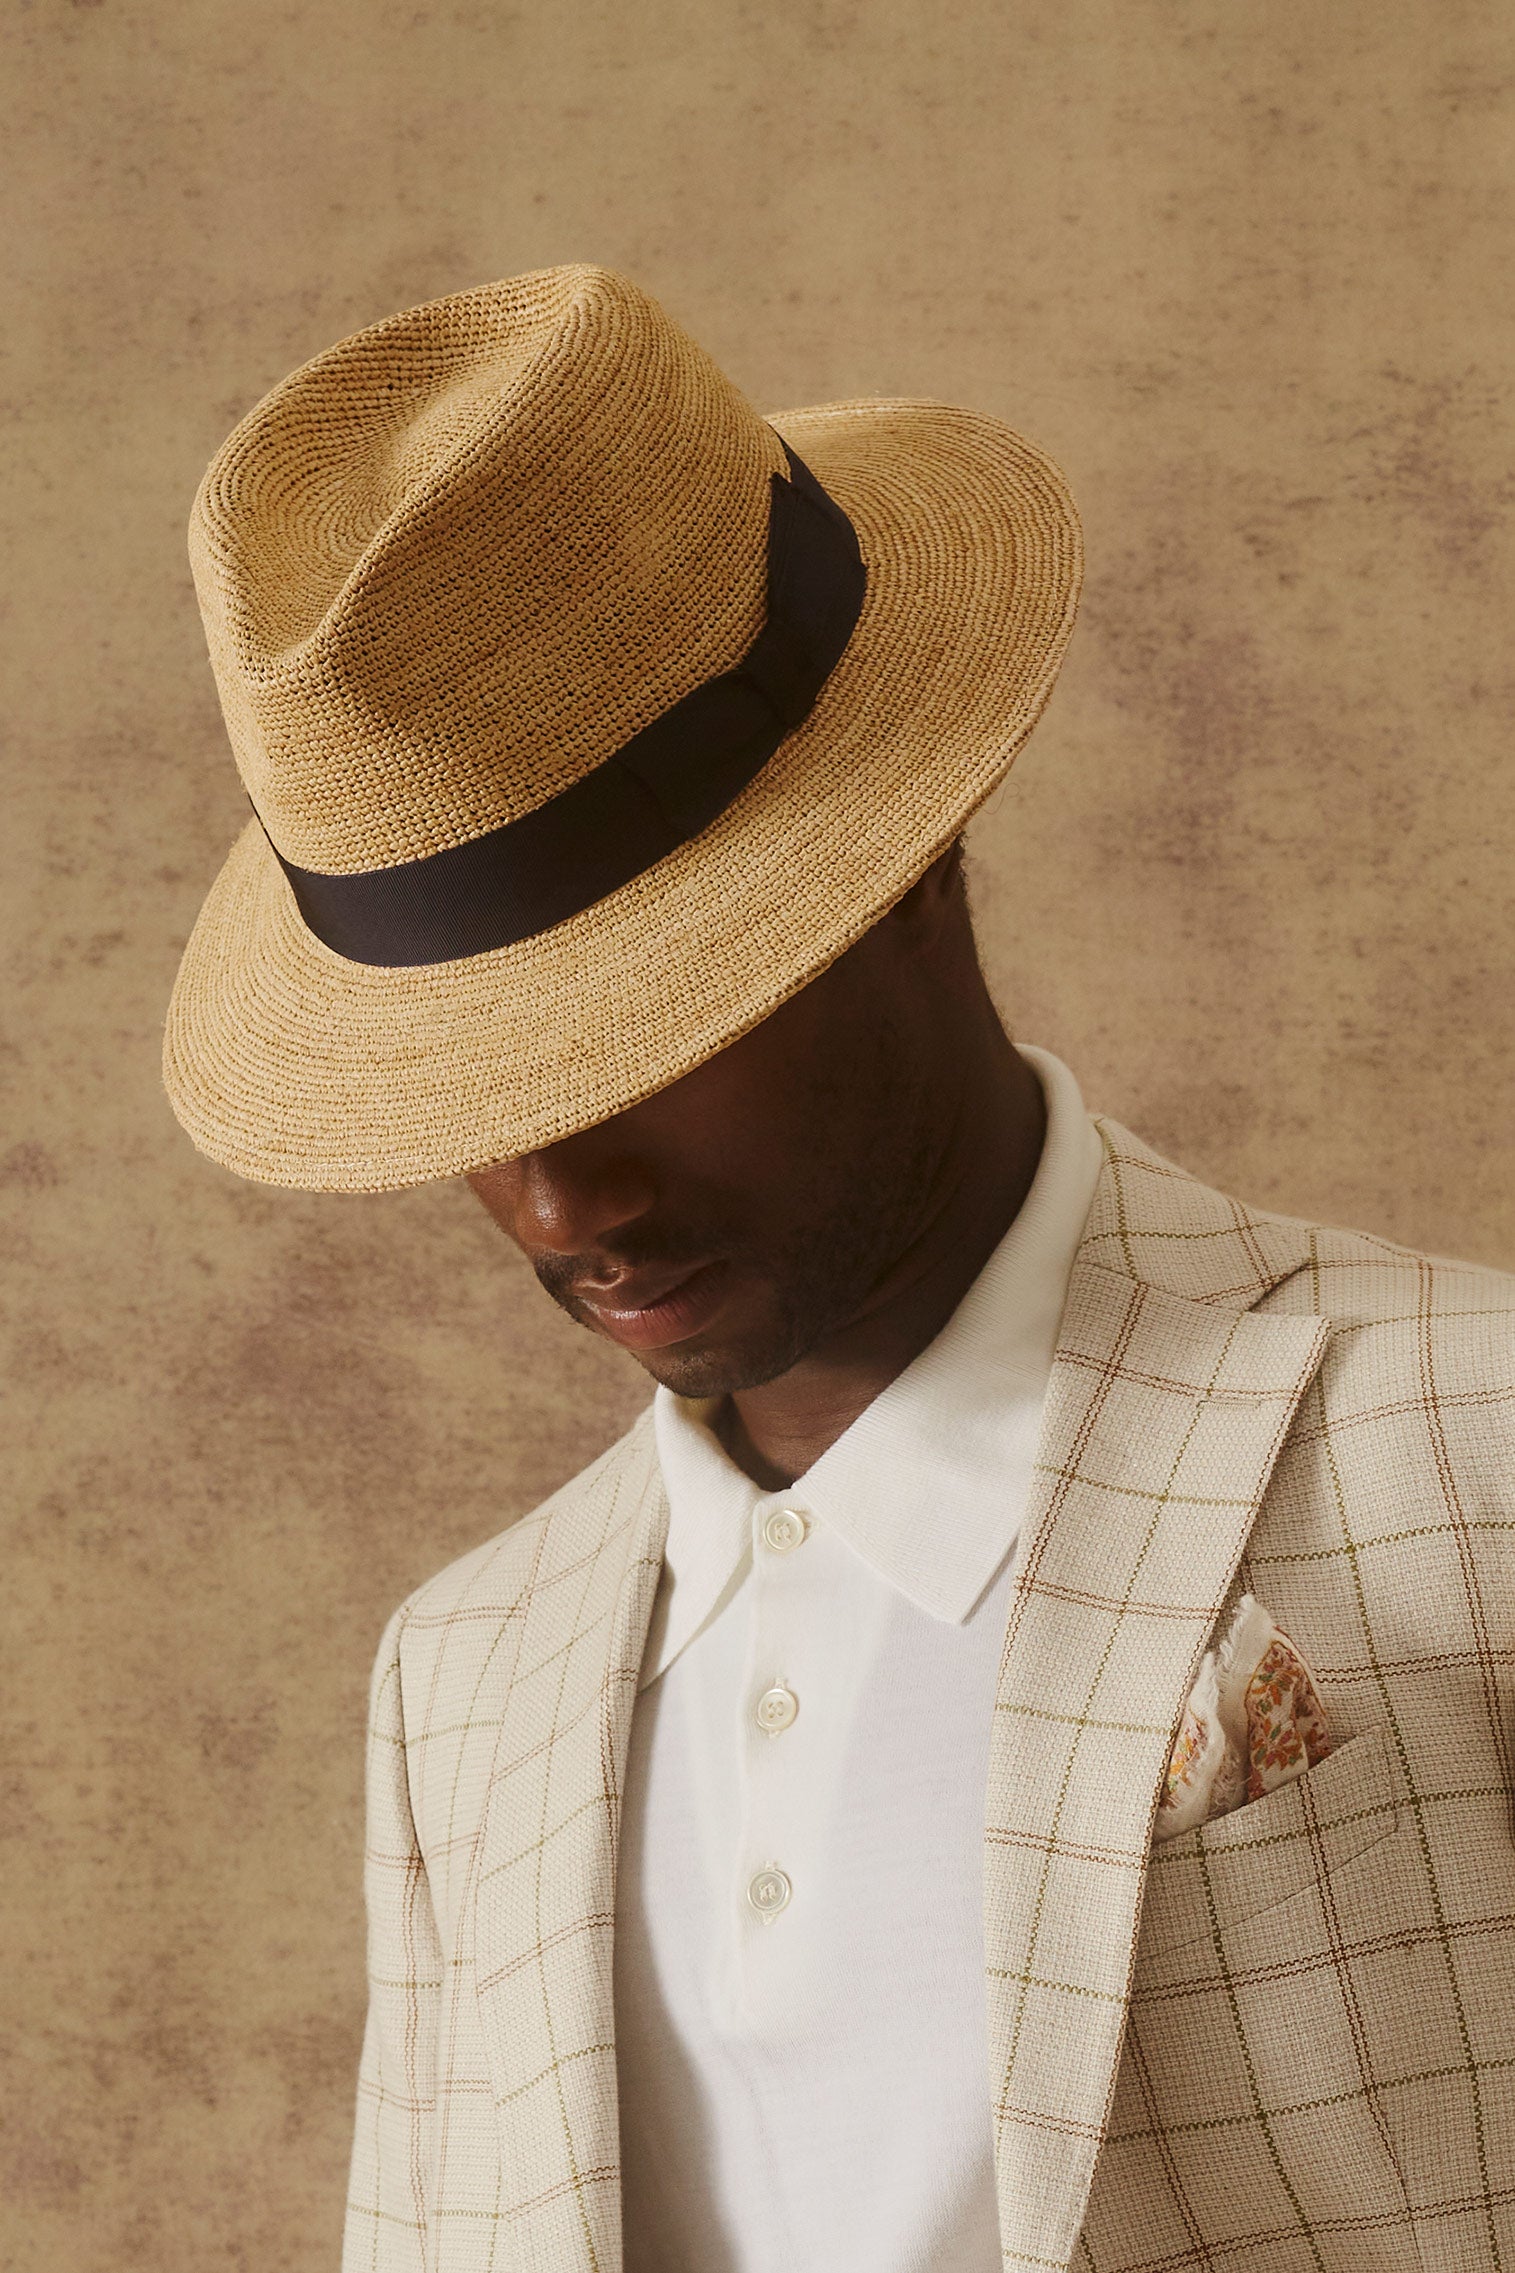 St Louis Trilby - Panamas and Sun Hats for Men - Lock & Co. Hatters London UK